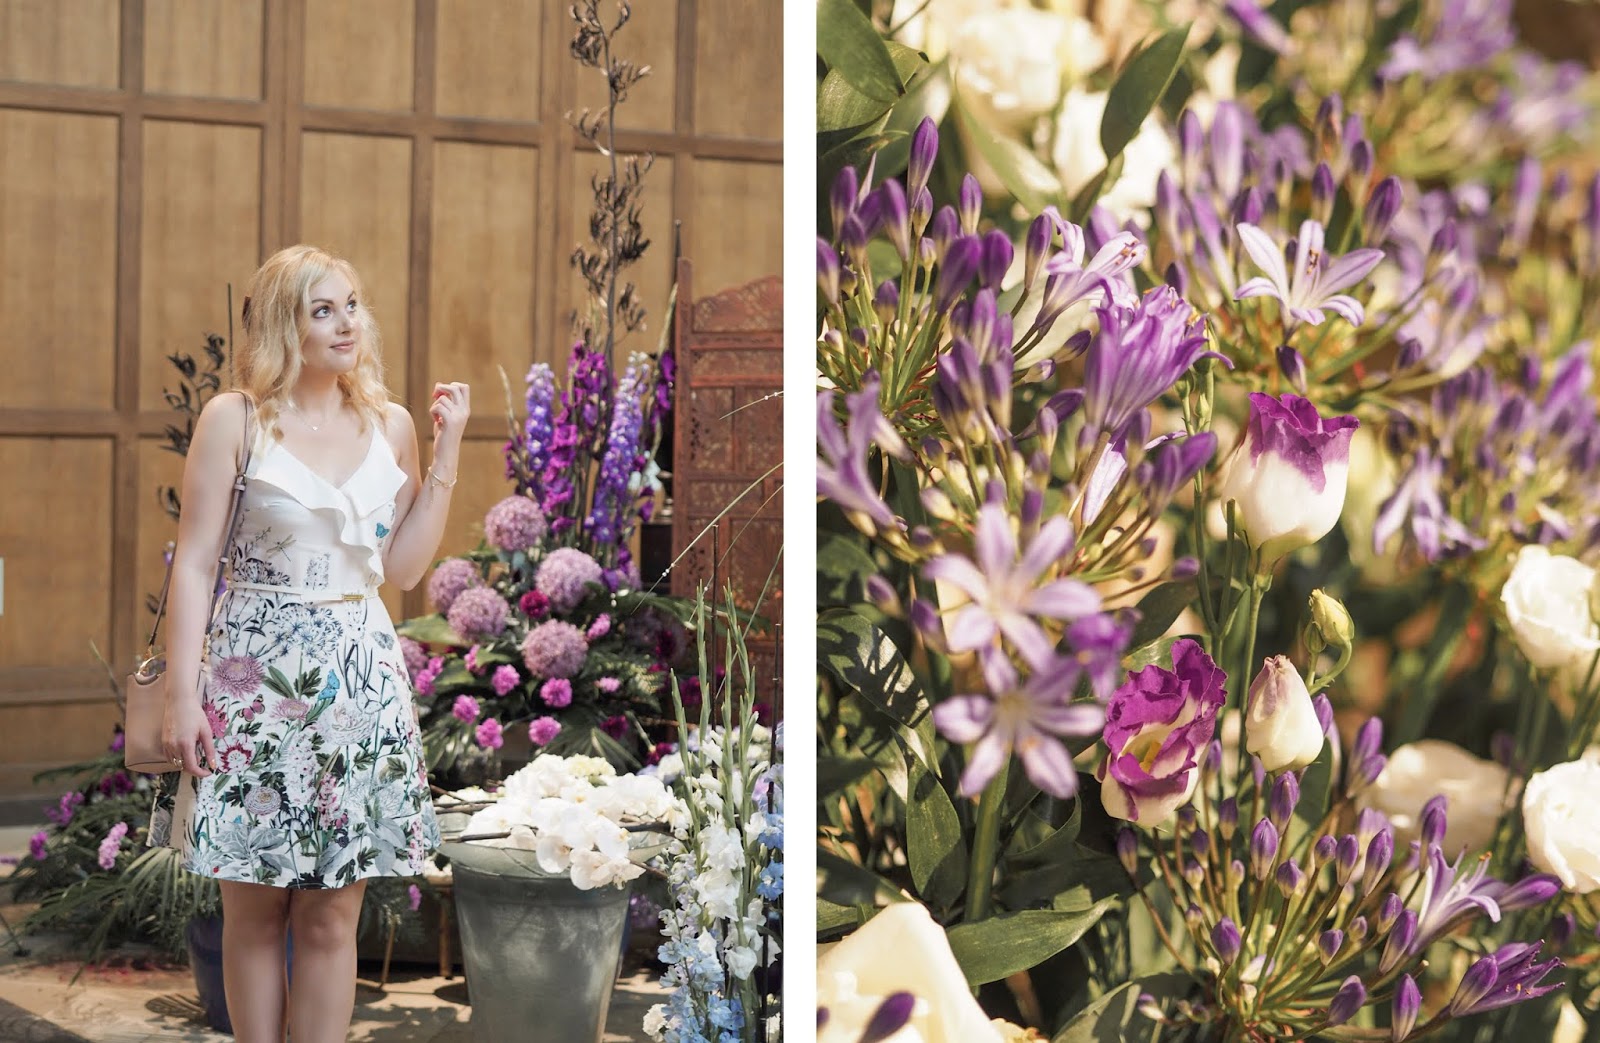 Stop & Smell The Flowers - Life’s Moments With Pandora, Katie Kirk Loves, UK Blogger, Pandora Life's Moments, Pandora Jewellery, Pandora Jewelry, Chichester Festival of Flowers, West Sussex, Flower Festival, Spring Blooms, Flower Displays, Spring Flowers, Oasis Fashion, Oasis Natural History Museum Collection, UK Fashion Blogger, UK Style Blogger, Fashion Influencer, Style Influencer, UK Influencer